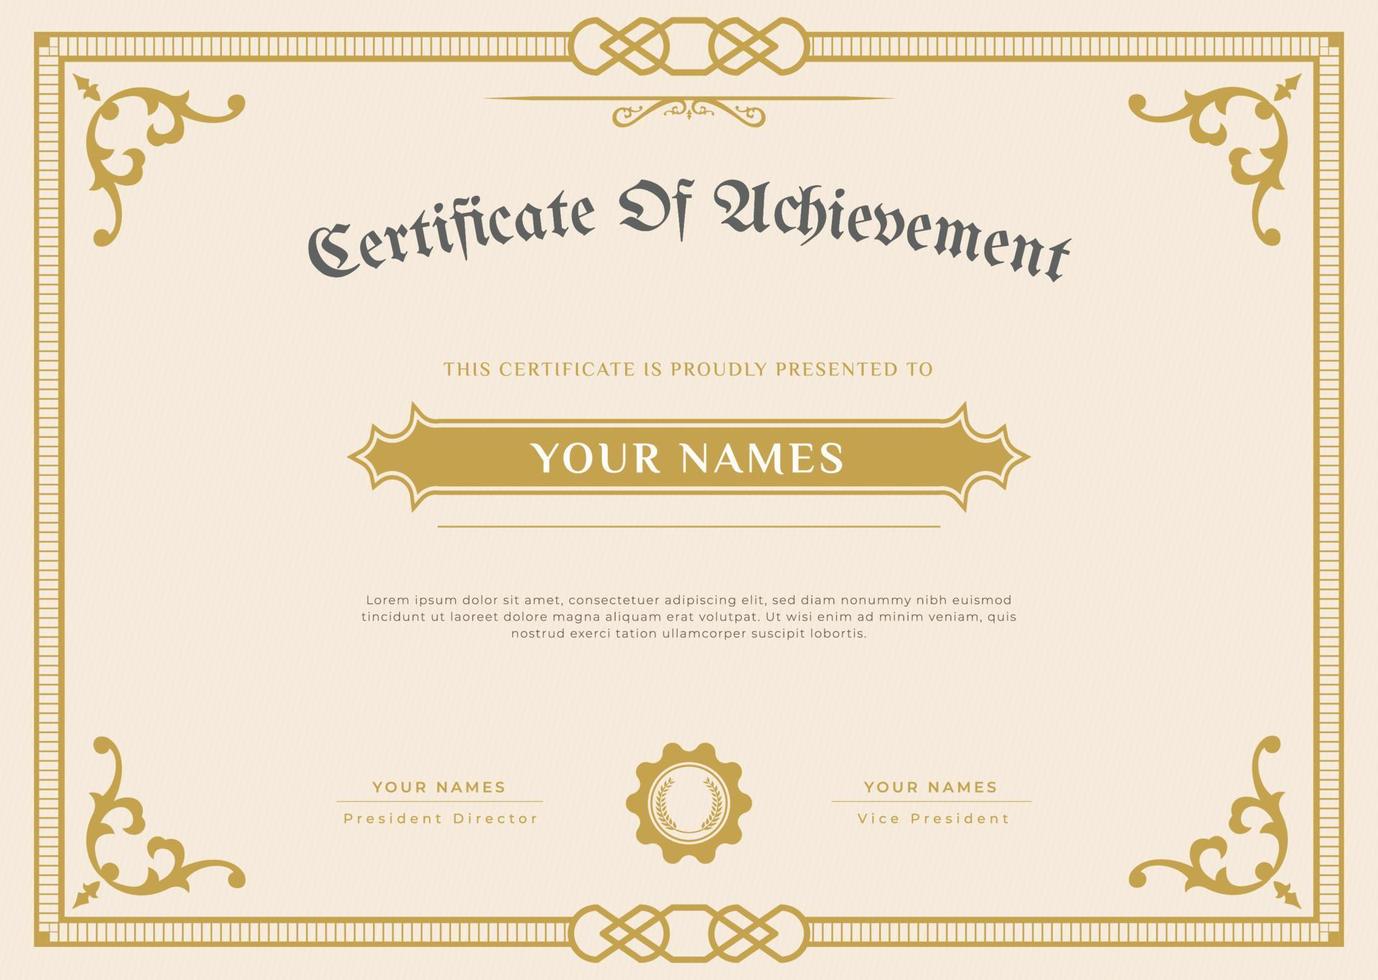 professional certificate for appreciation and achievement with retro style design vector